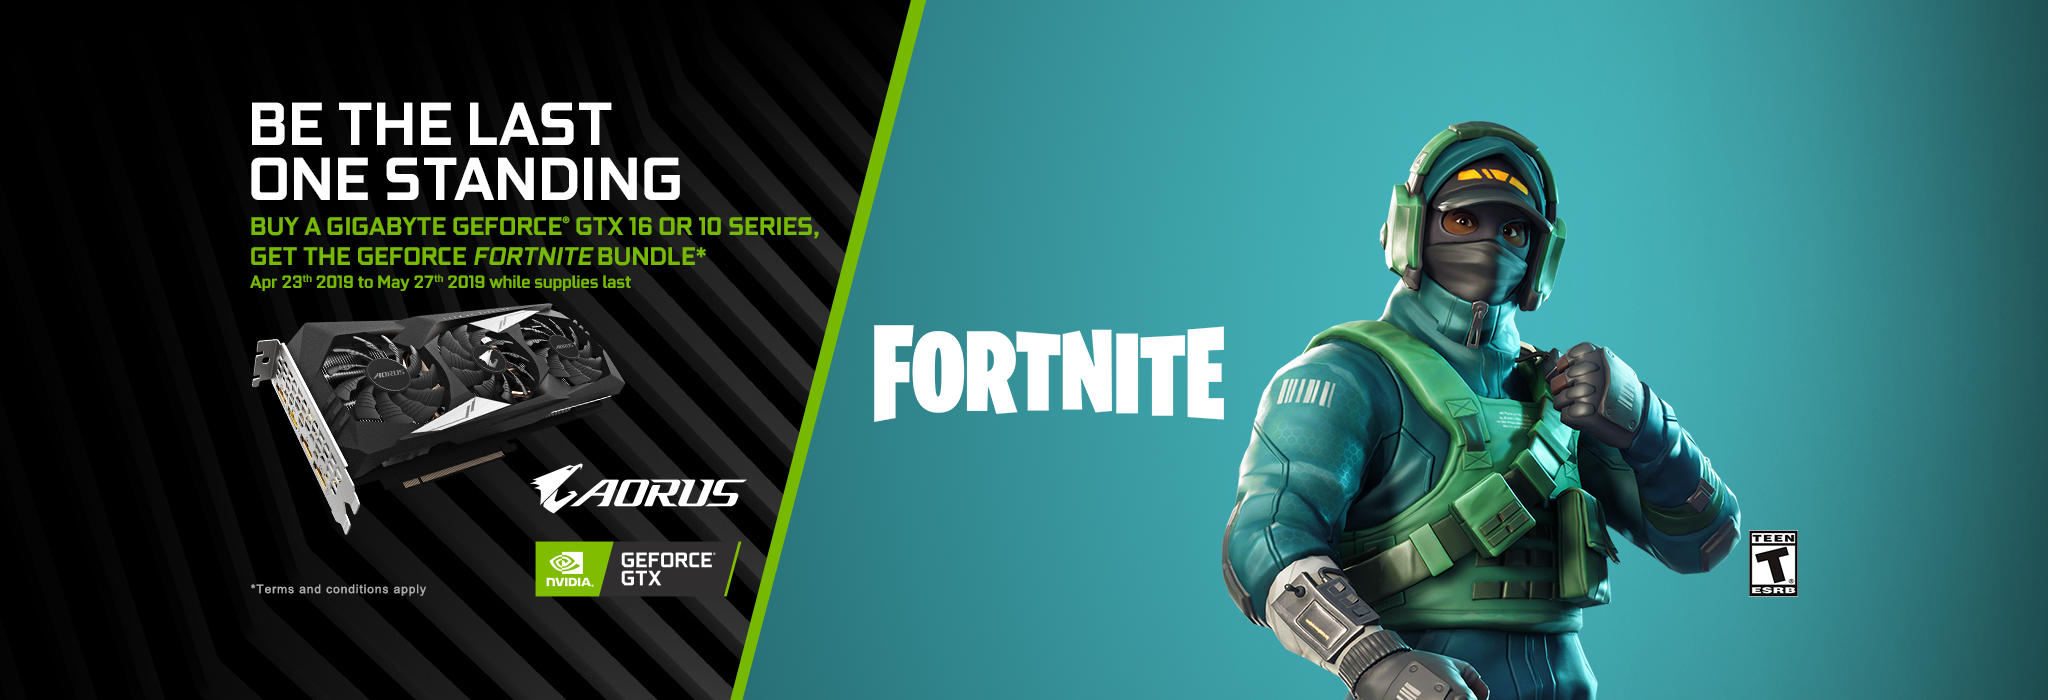 buy a qualified gigabyte geforce gtx 1660ti 1660 1650 1070ti 1070 1060 1050ti and 1050 graphics cards and get the geforce fortnite bundle - nvidia bundle fortnite code free